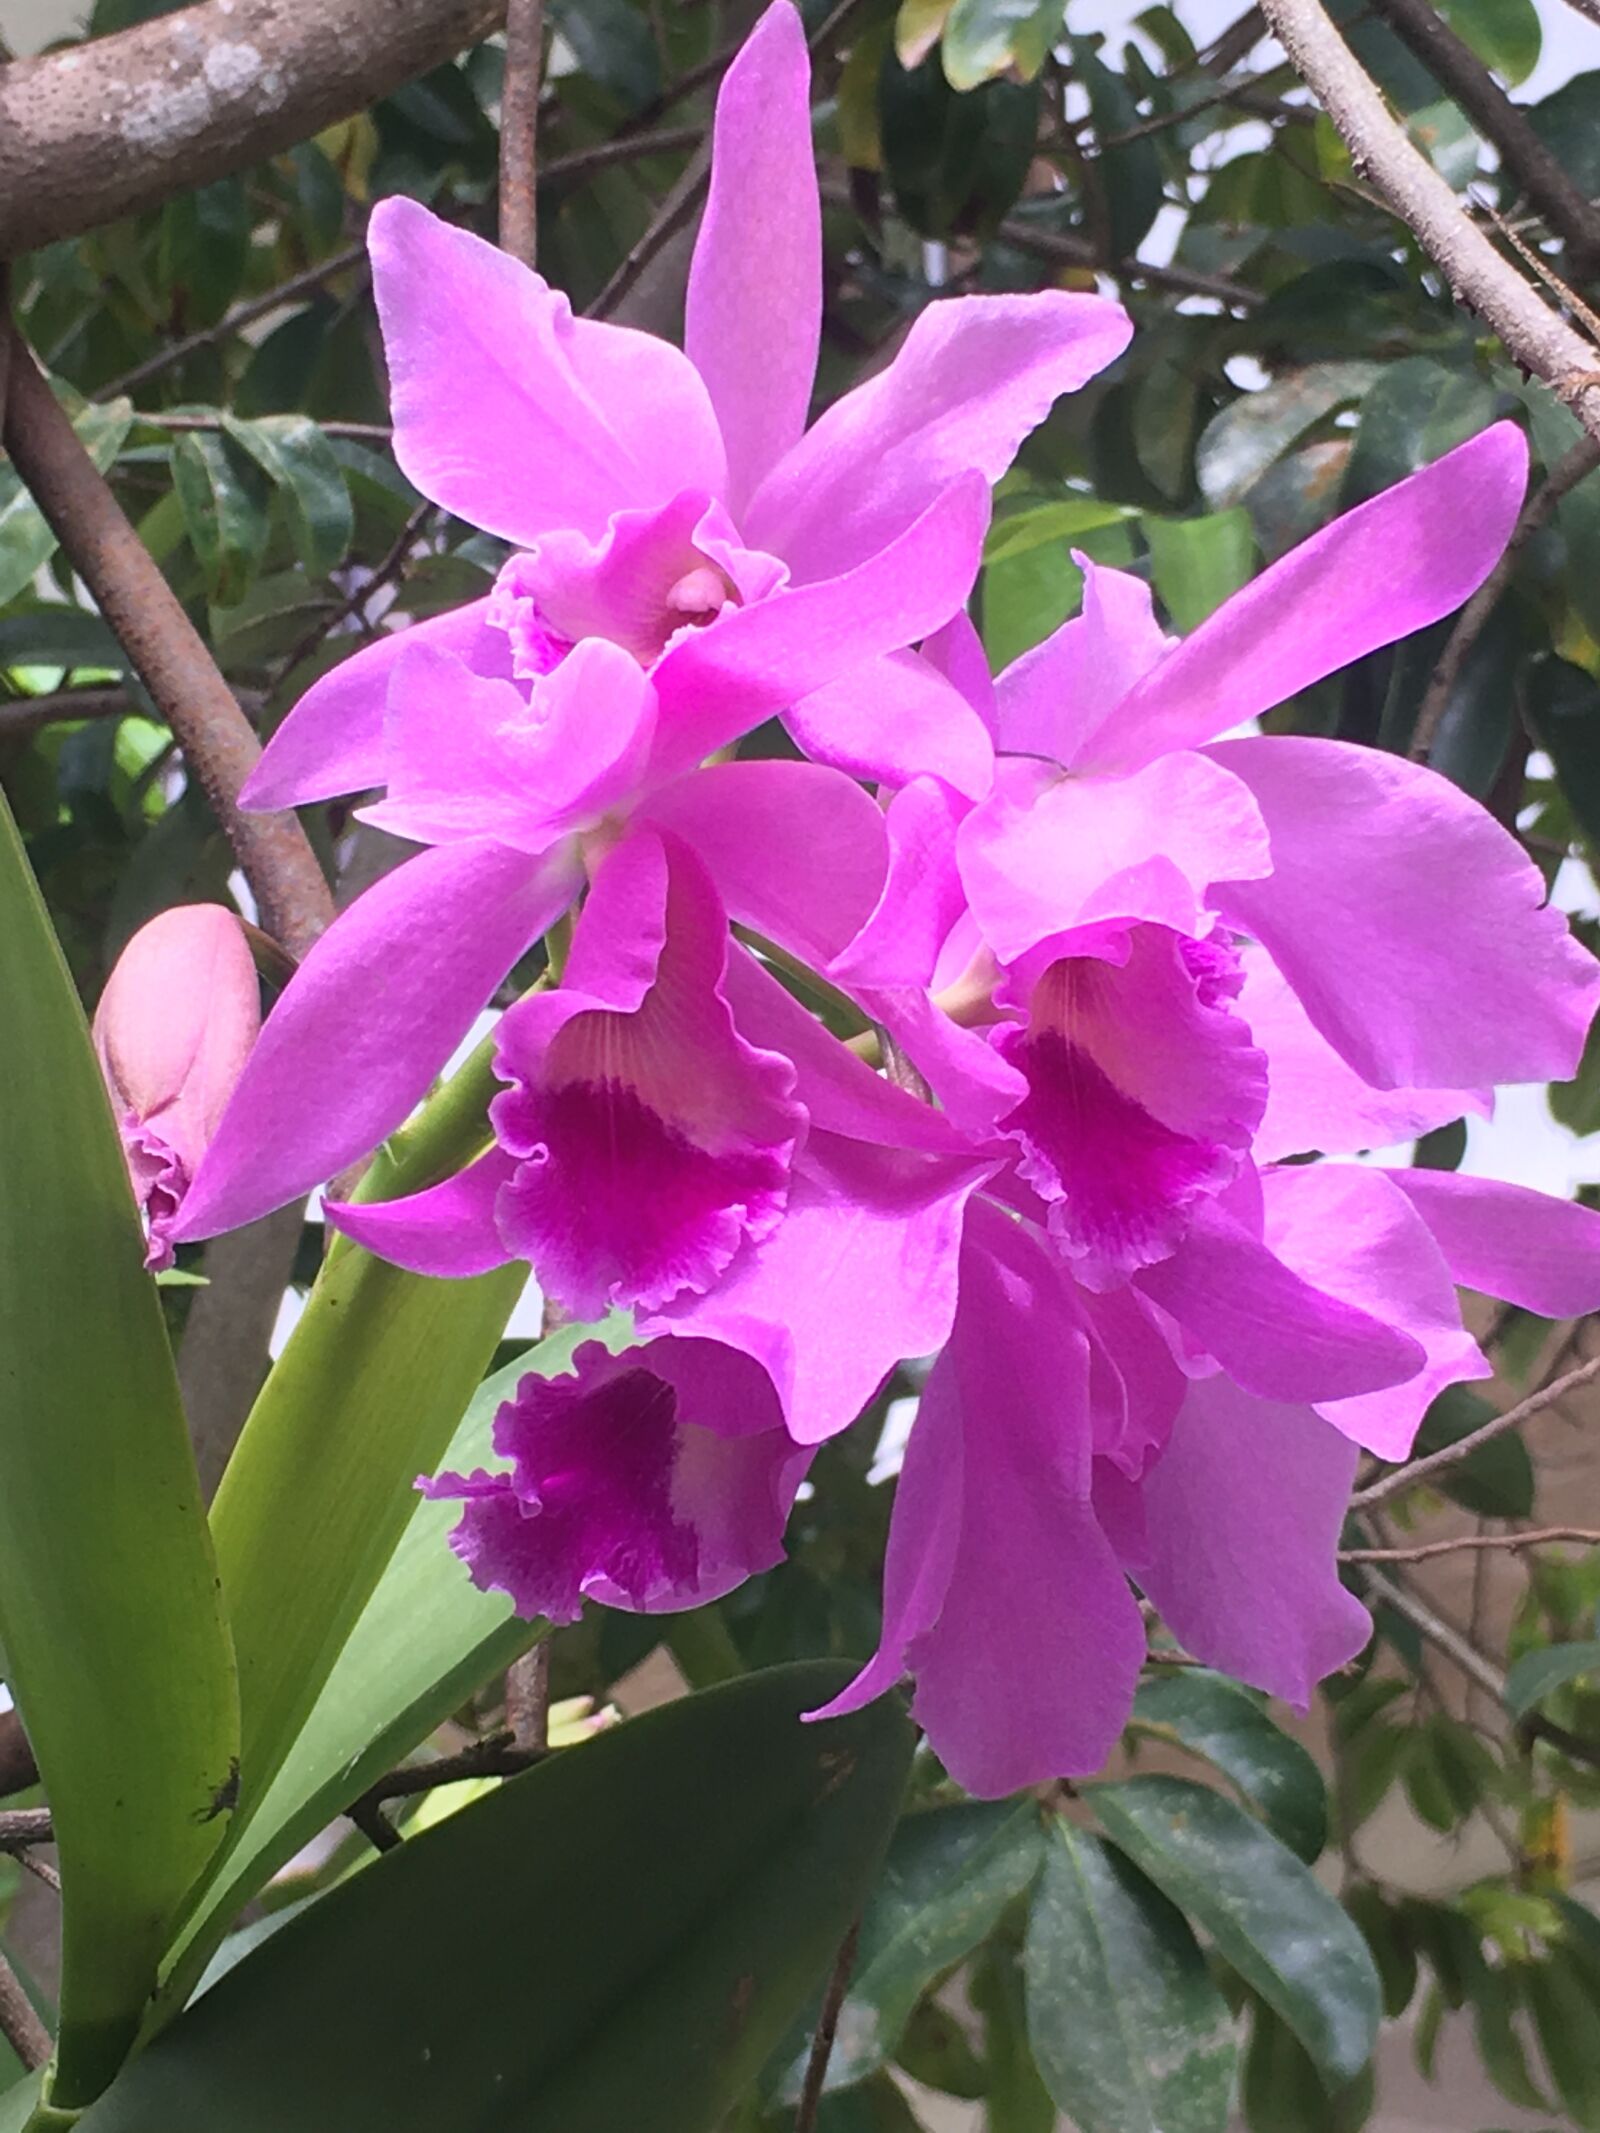 Apple iPhone 6s Plus + iPhone 6s Plus back camera 4.15mm f/2.2 sample photo. Vanda orchids, green leaf photography